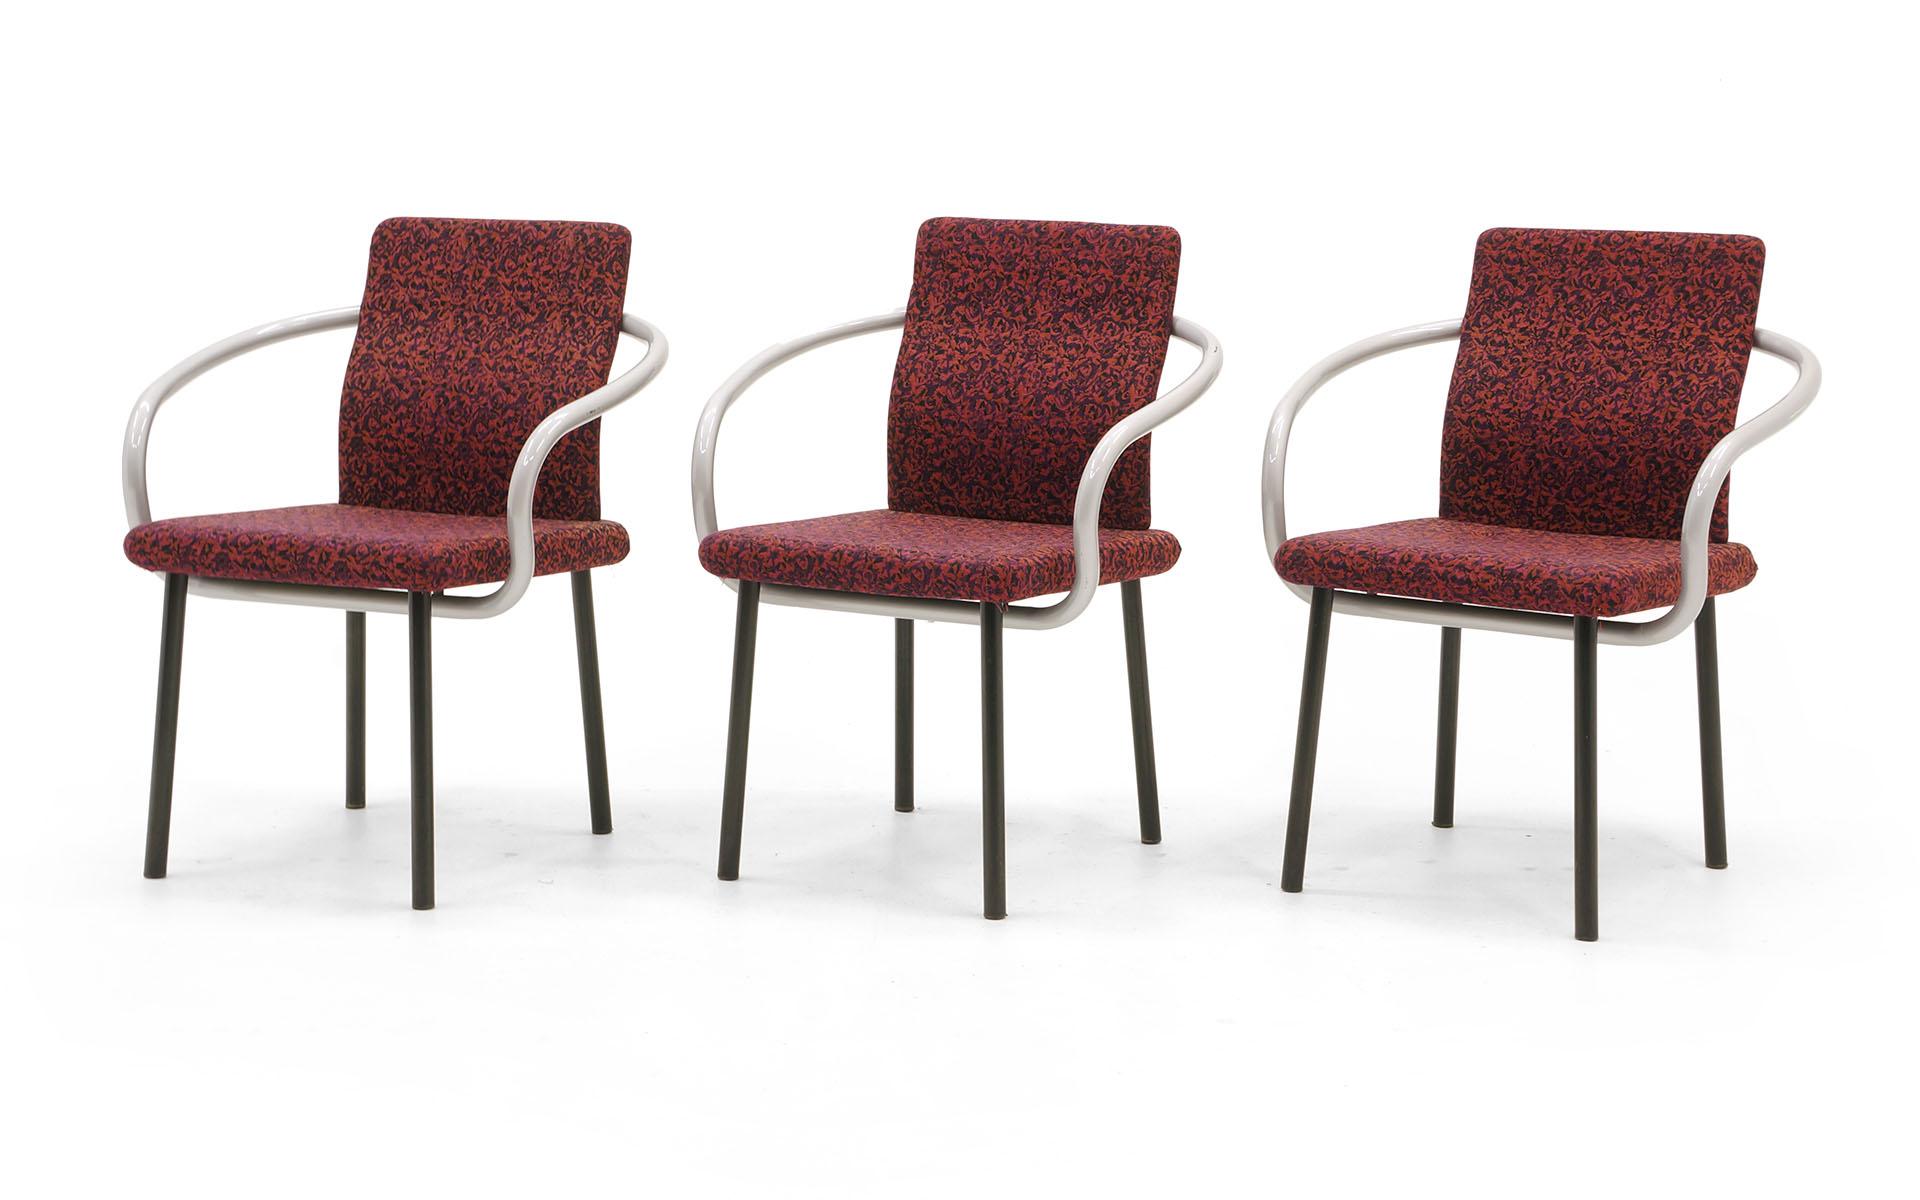 Set of six dining chairs designed by Ettore Sottsass, the founder of the Memphis Group, Milan, Italy. These chairs are in very good completely original condition. Super sturdy construction, featuring bentwood one piece arms that wrap under and